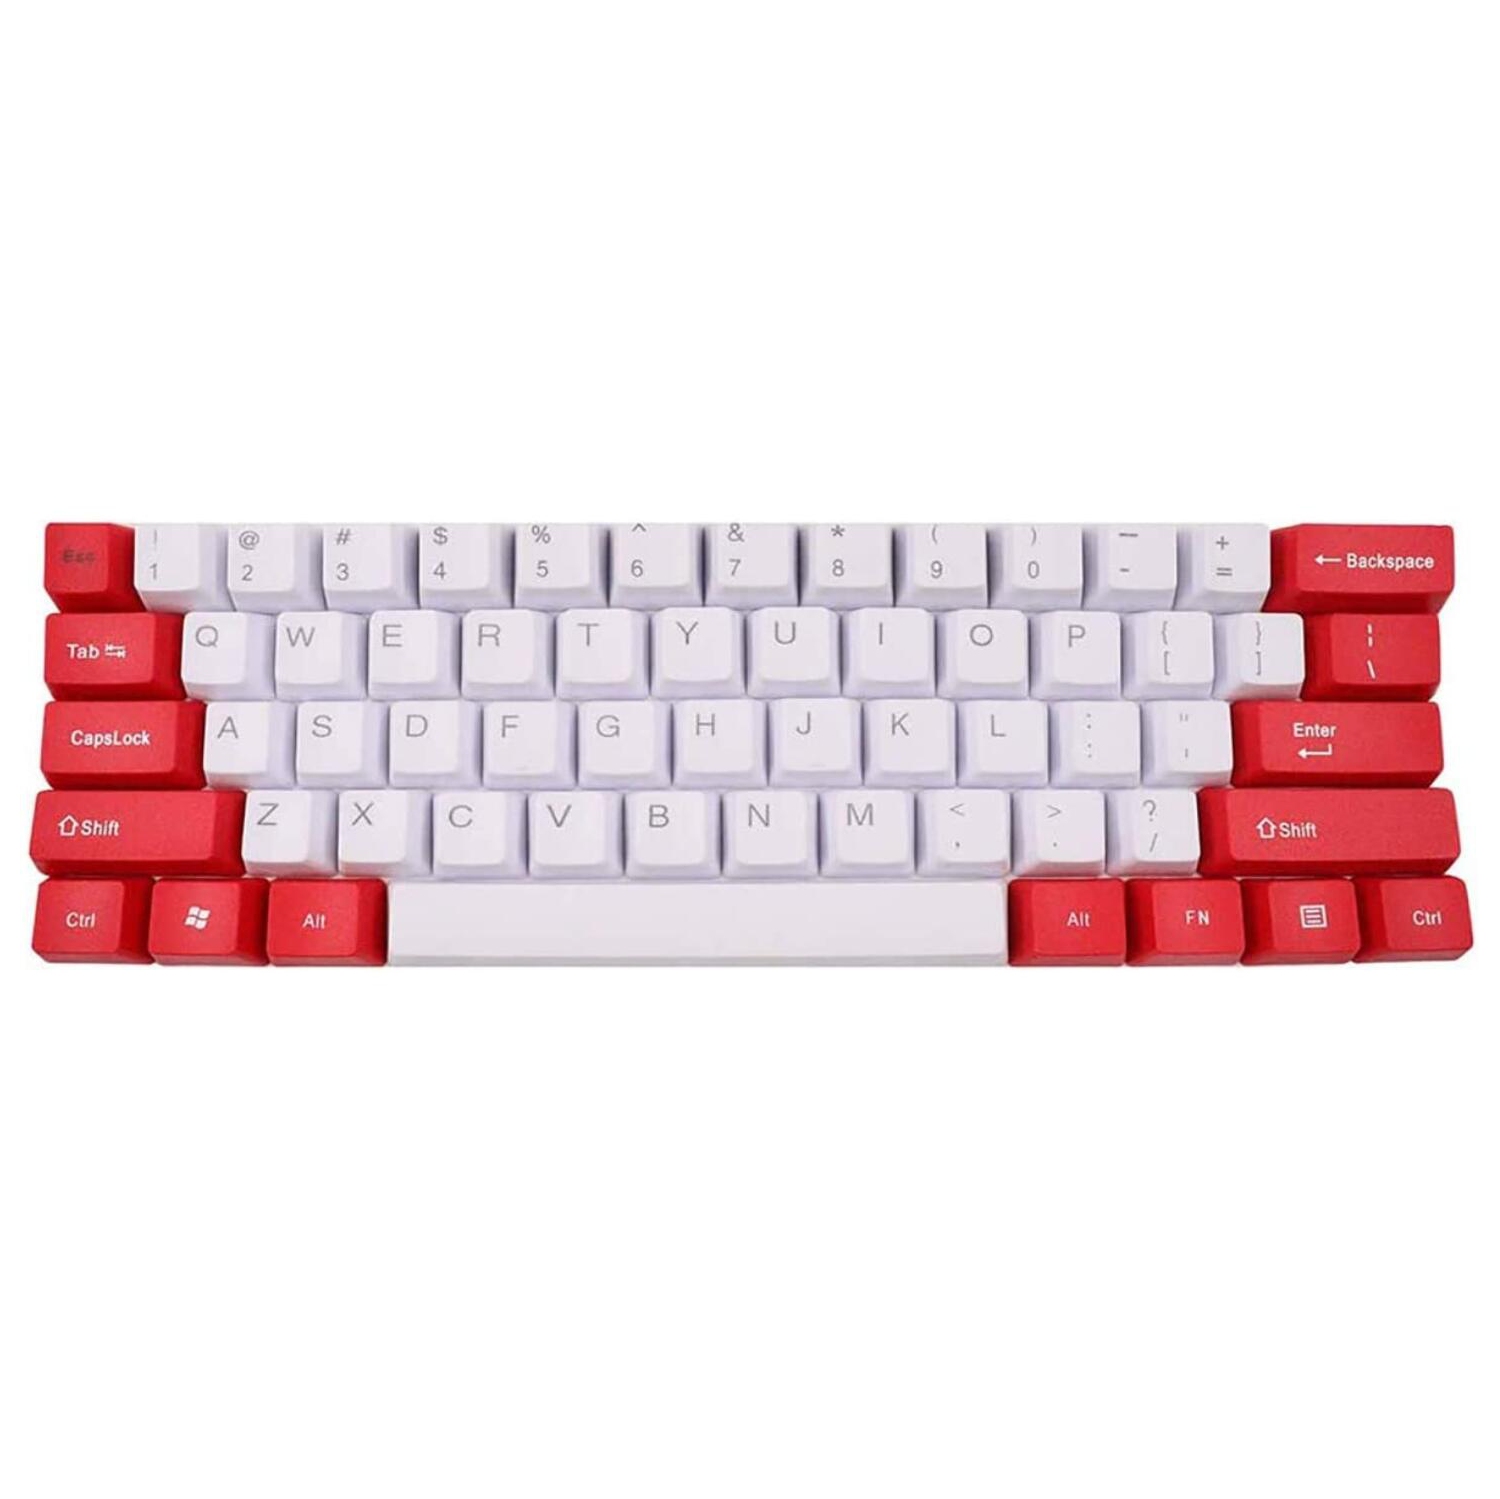 61keys ANSI Layout OEM Profile keycaps PBT Key Cap for MX Switches Gaming Mechanical Keyboard White+Red Color